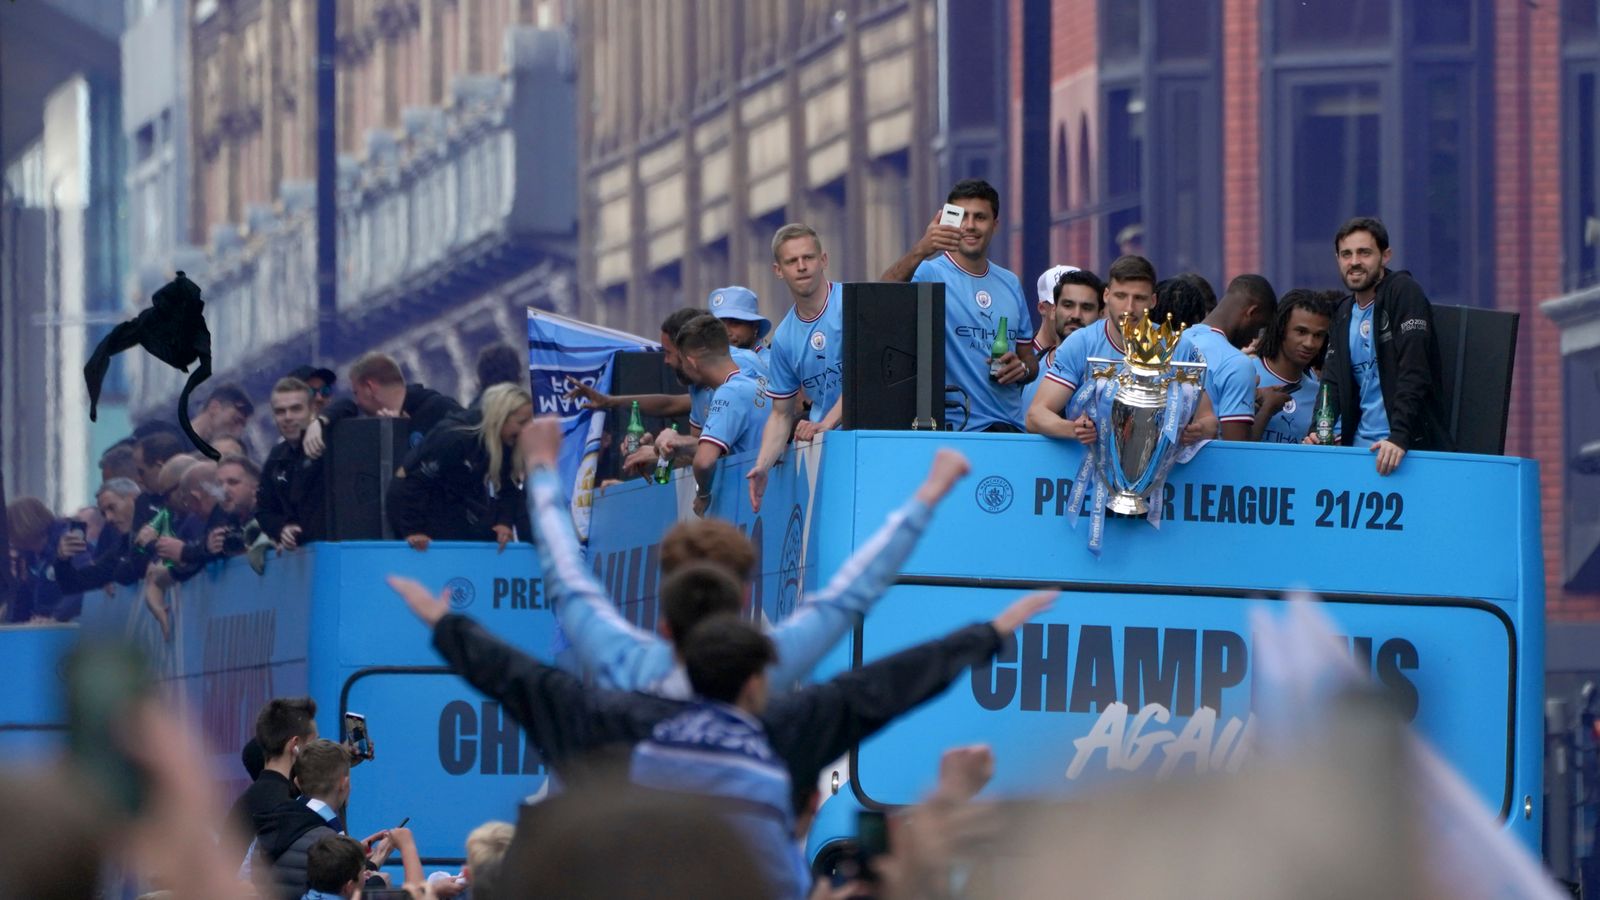 Manchester City Parade: Fans stand along the streets as the team celebrates the Premier League title on an open bus |  UK News